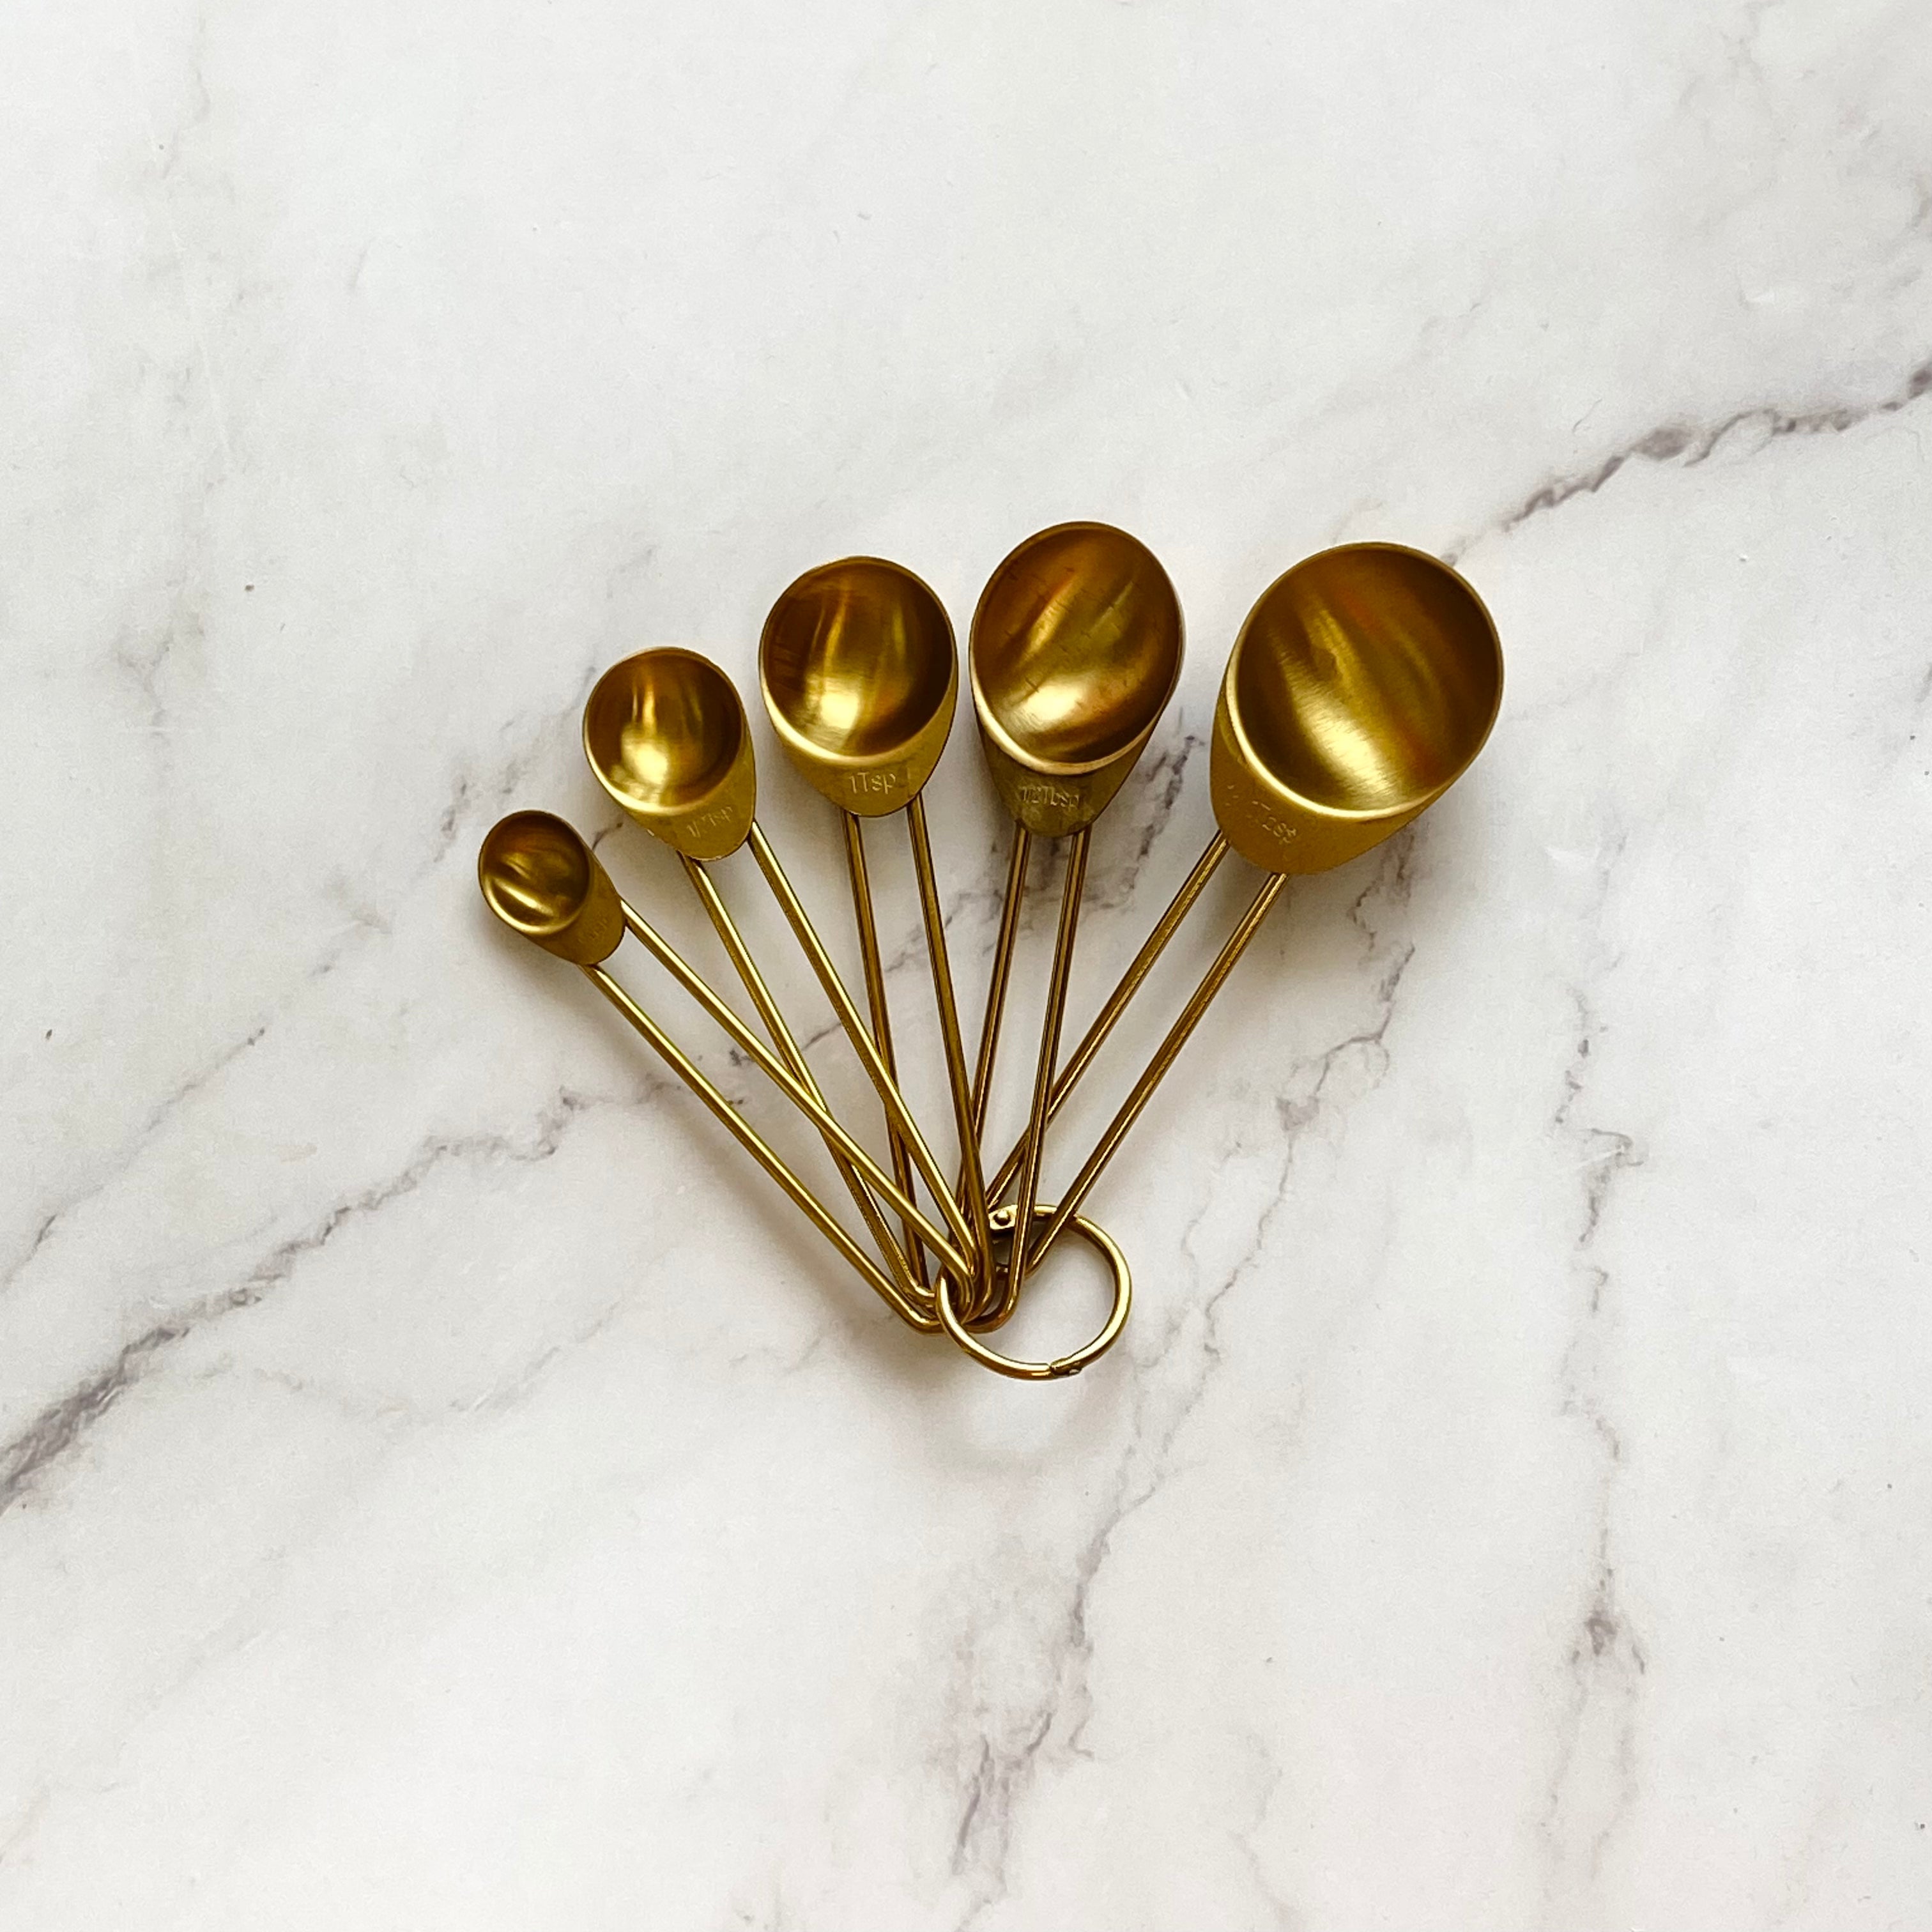 Gold Stainless Steel Measuring Cups — Stripes & Willows